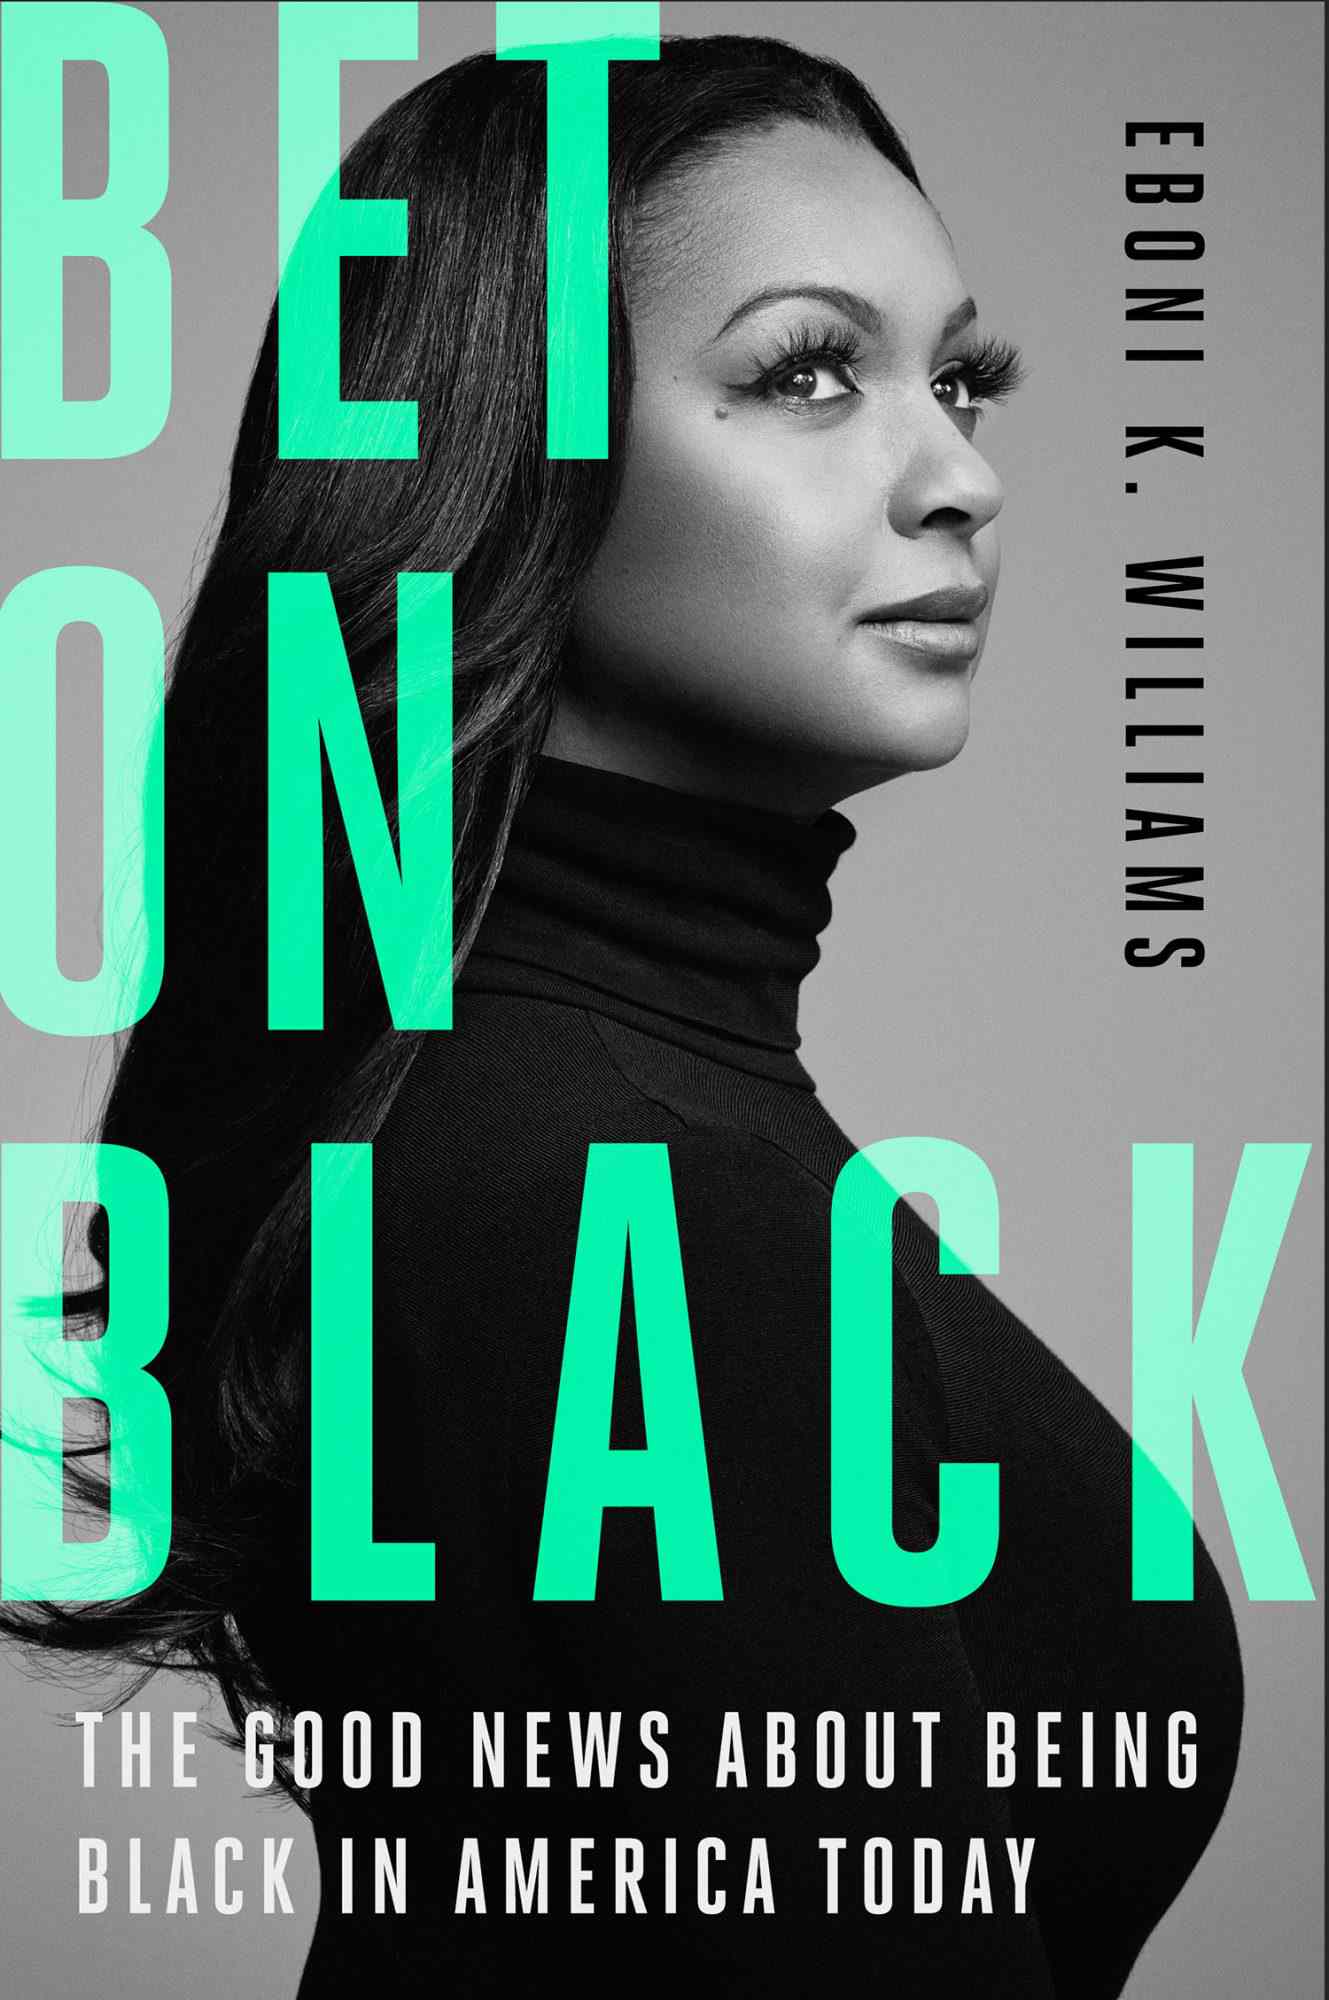 Bet on Black: The Good News about Being Black in America Today by Eboni K. Williams